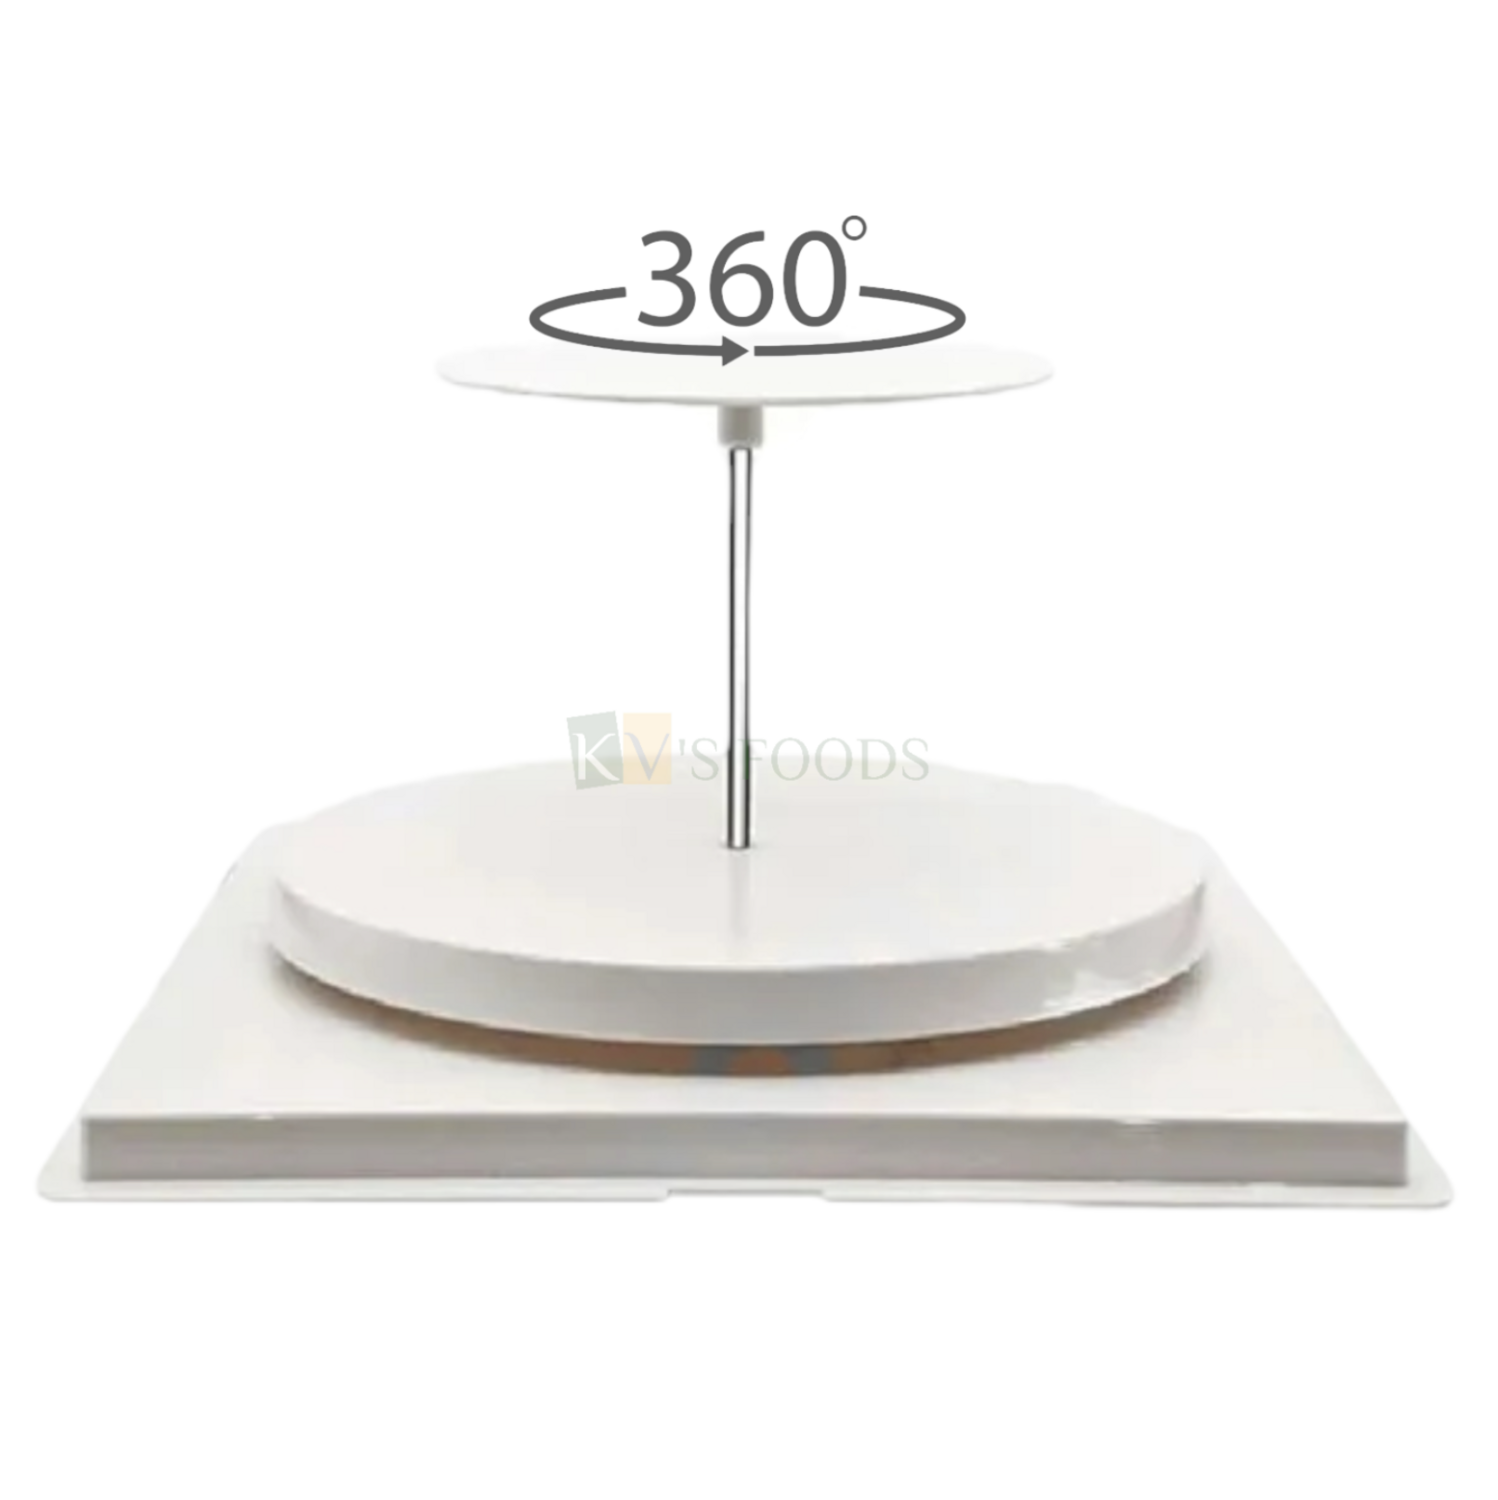 7'' Round Cake 360 Electric Rotating Layered Cake Table Stand with Base, 2 Layer Electric Revolving Round Cake Holder Circle Base for Cake Decorating Supplies Party Dessert Tray Cake Tools